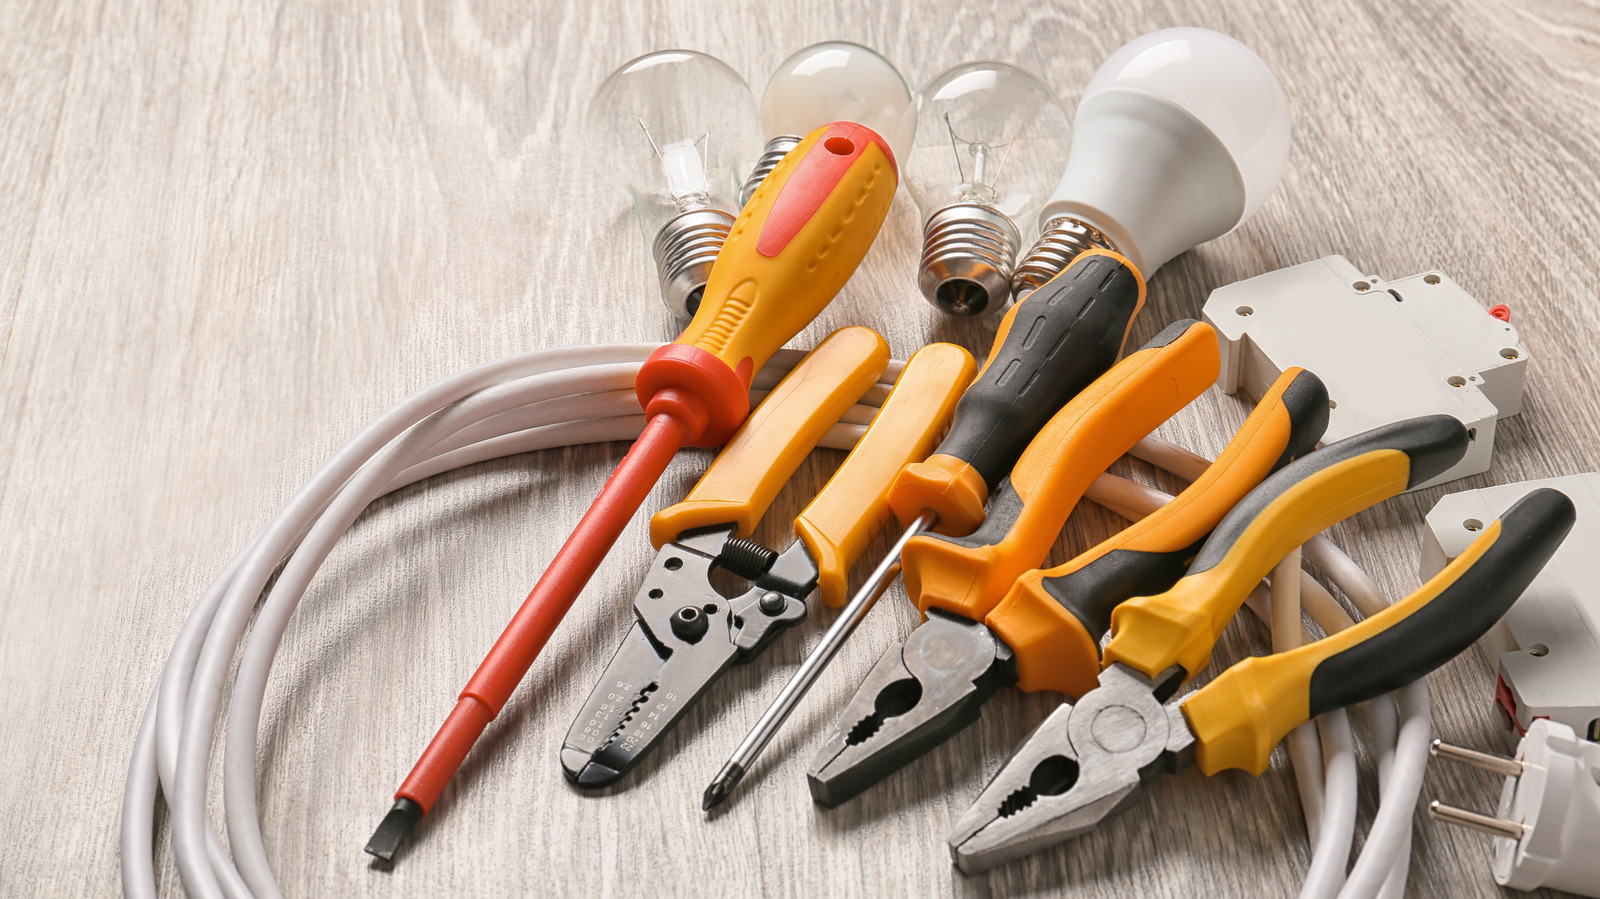 6 Plumbing Tools Every Homeowner Should Have